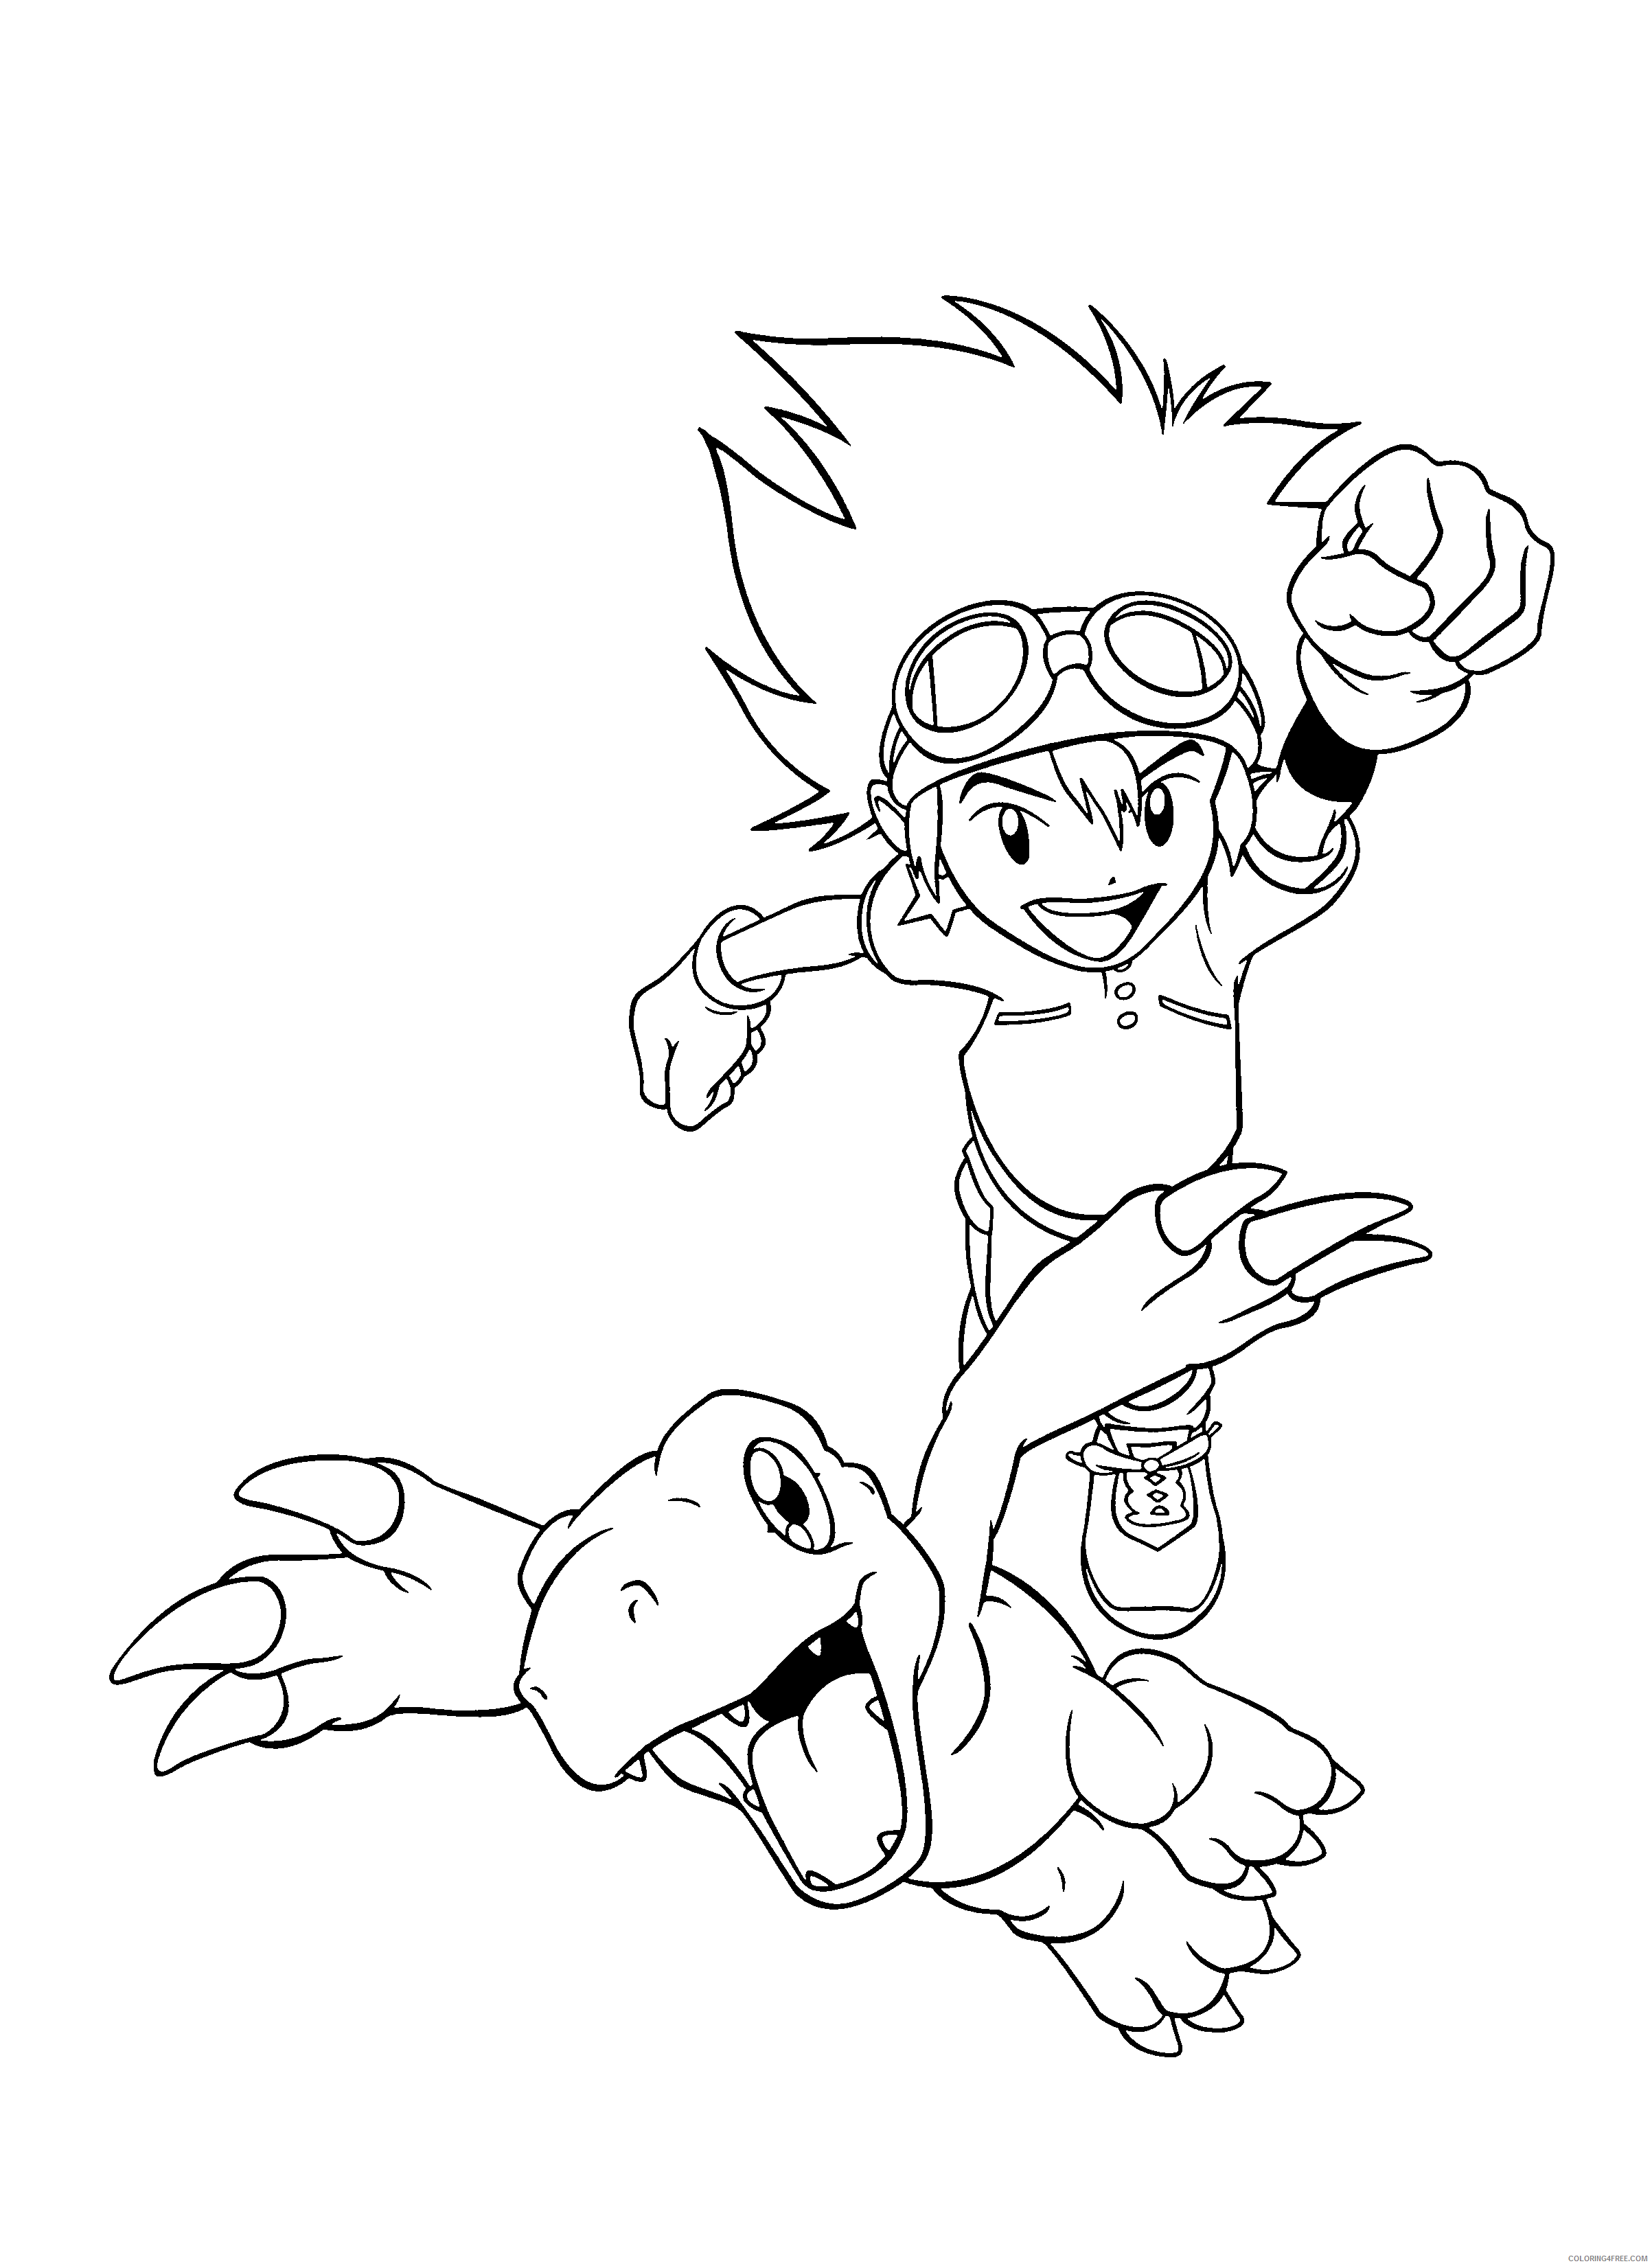 Digimon Printable Coloring Pages Anime digimon 177 2021 0266 Coloring4free